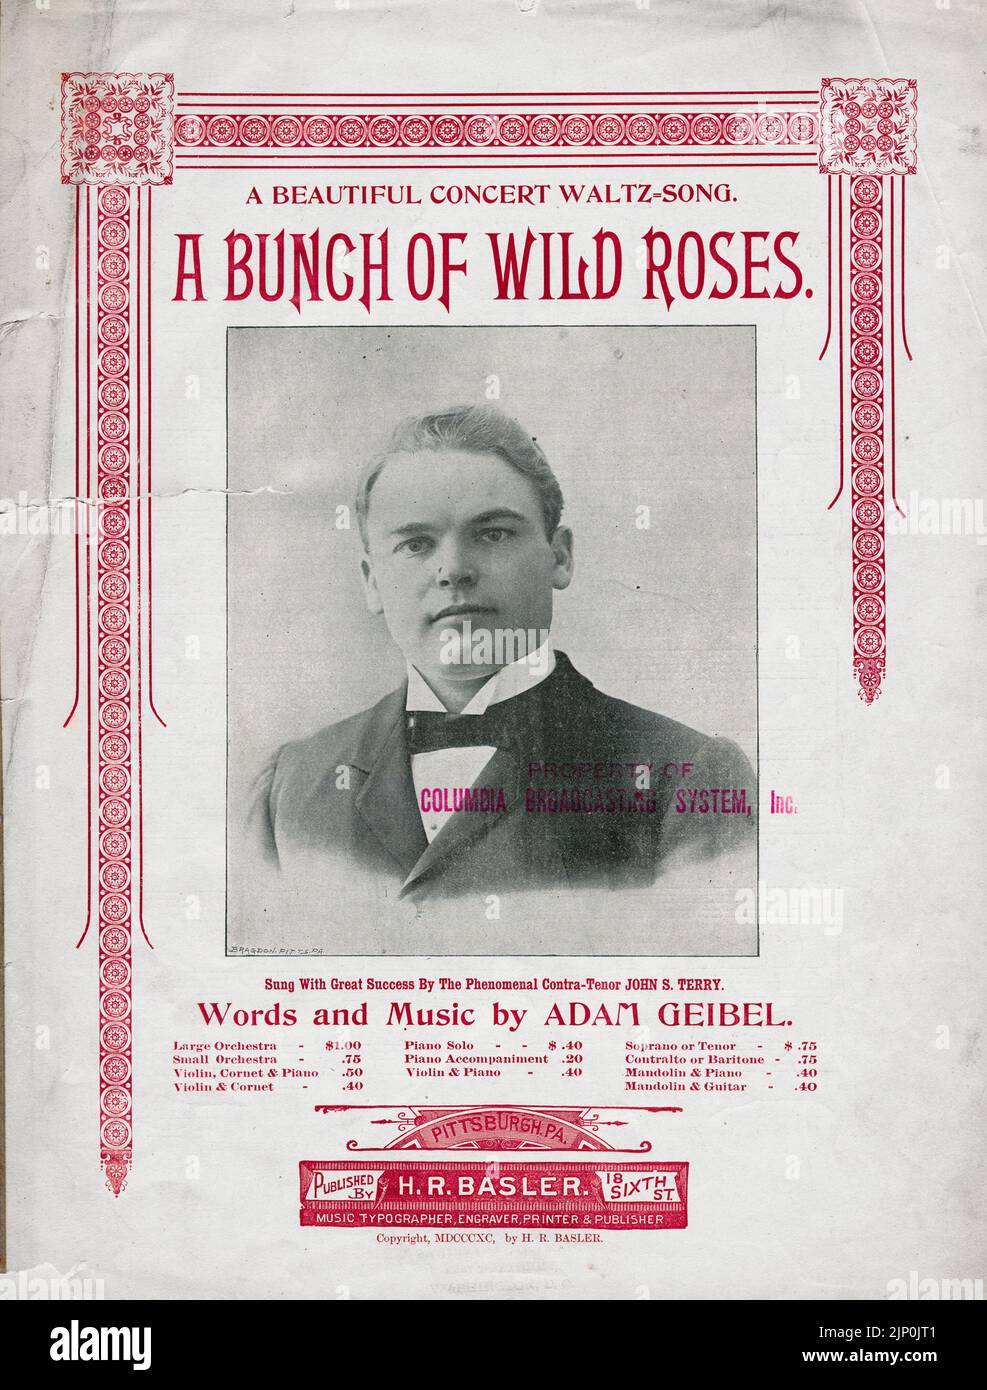 A Bunch of Wild Roses, Words and Music by Adam Geibel, Sung by John S. Terry, Published by H. R. Basler (1890) Sheet music cover Stock Photo